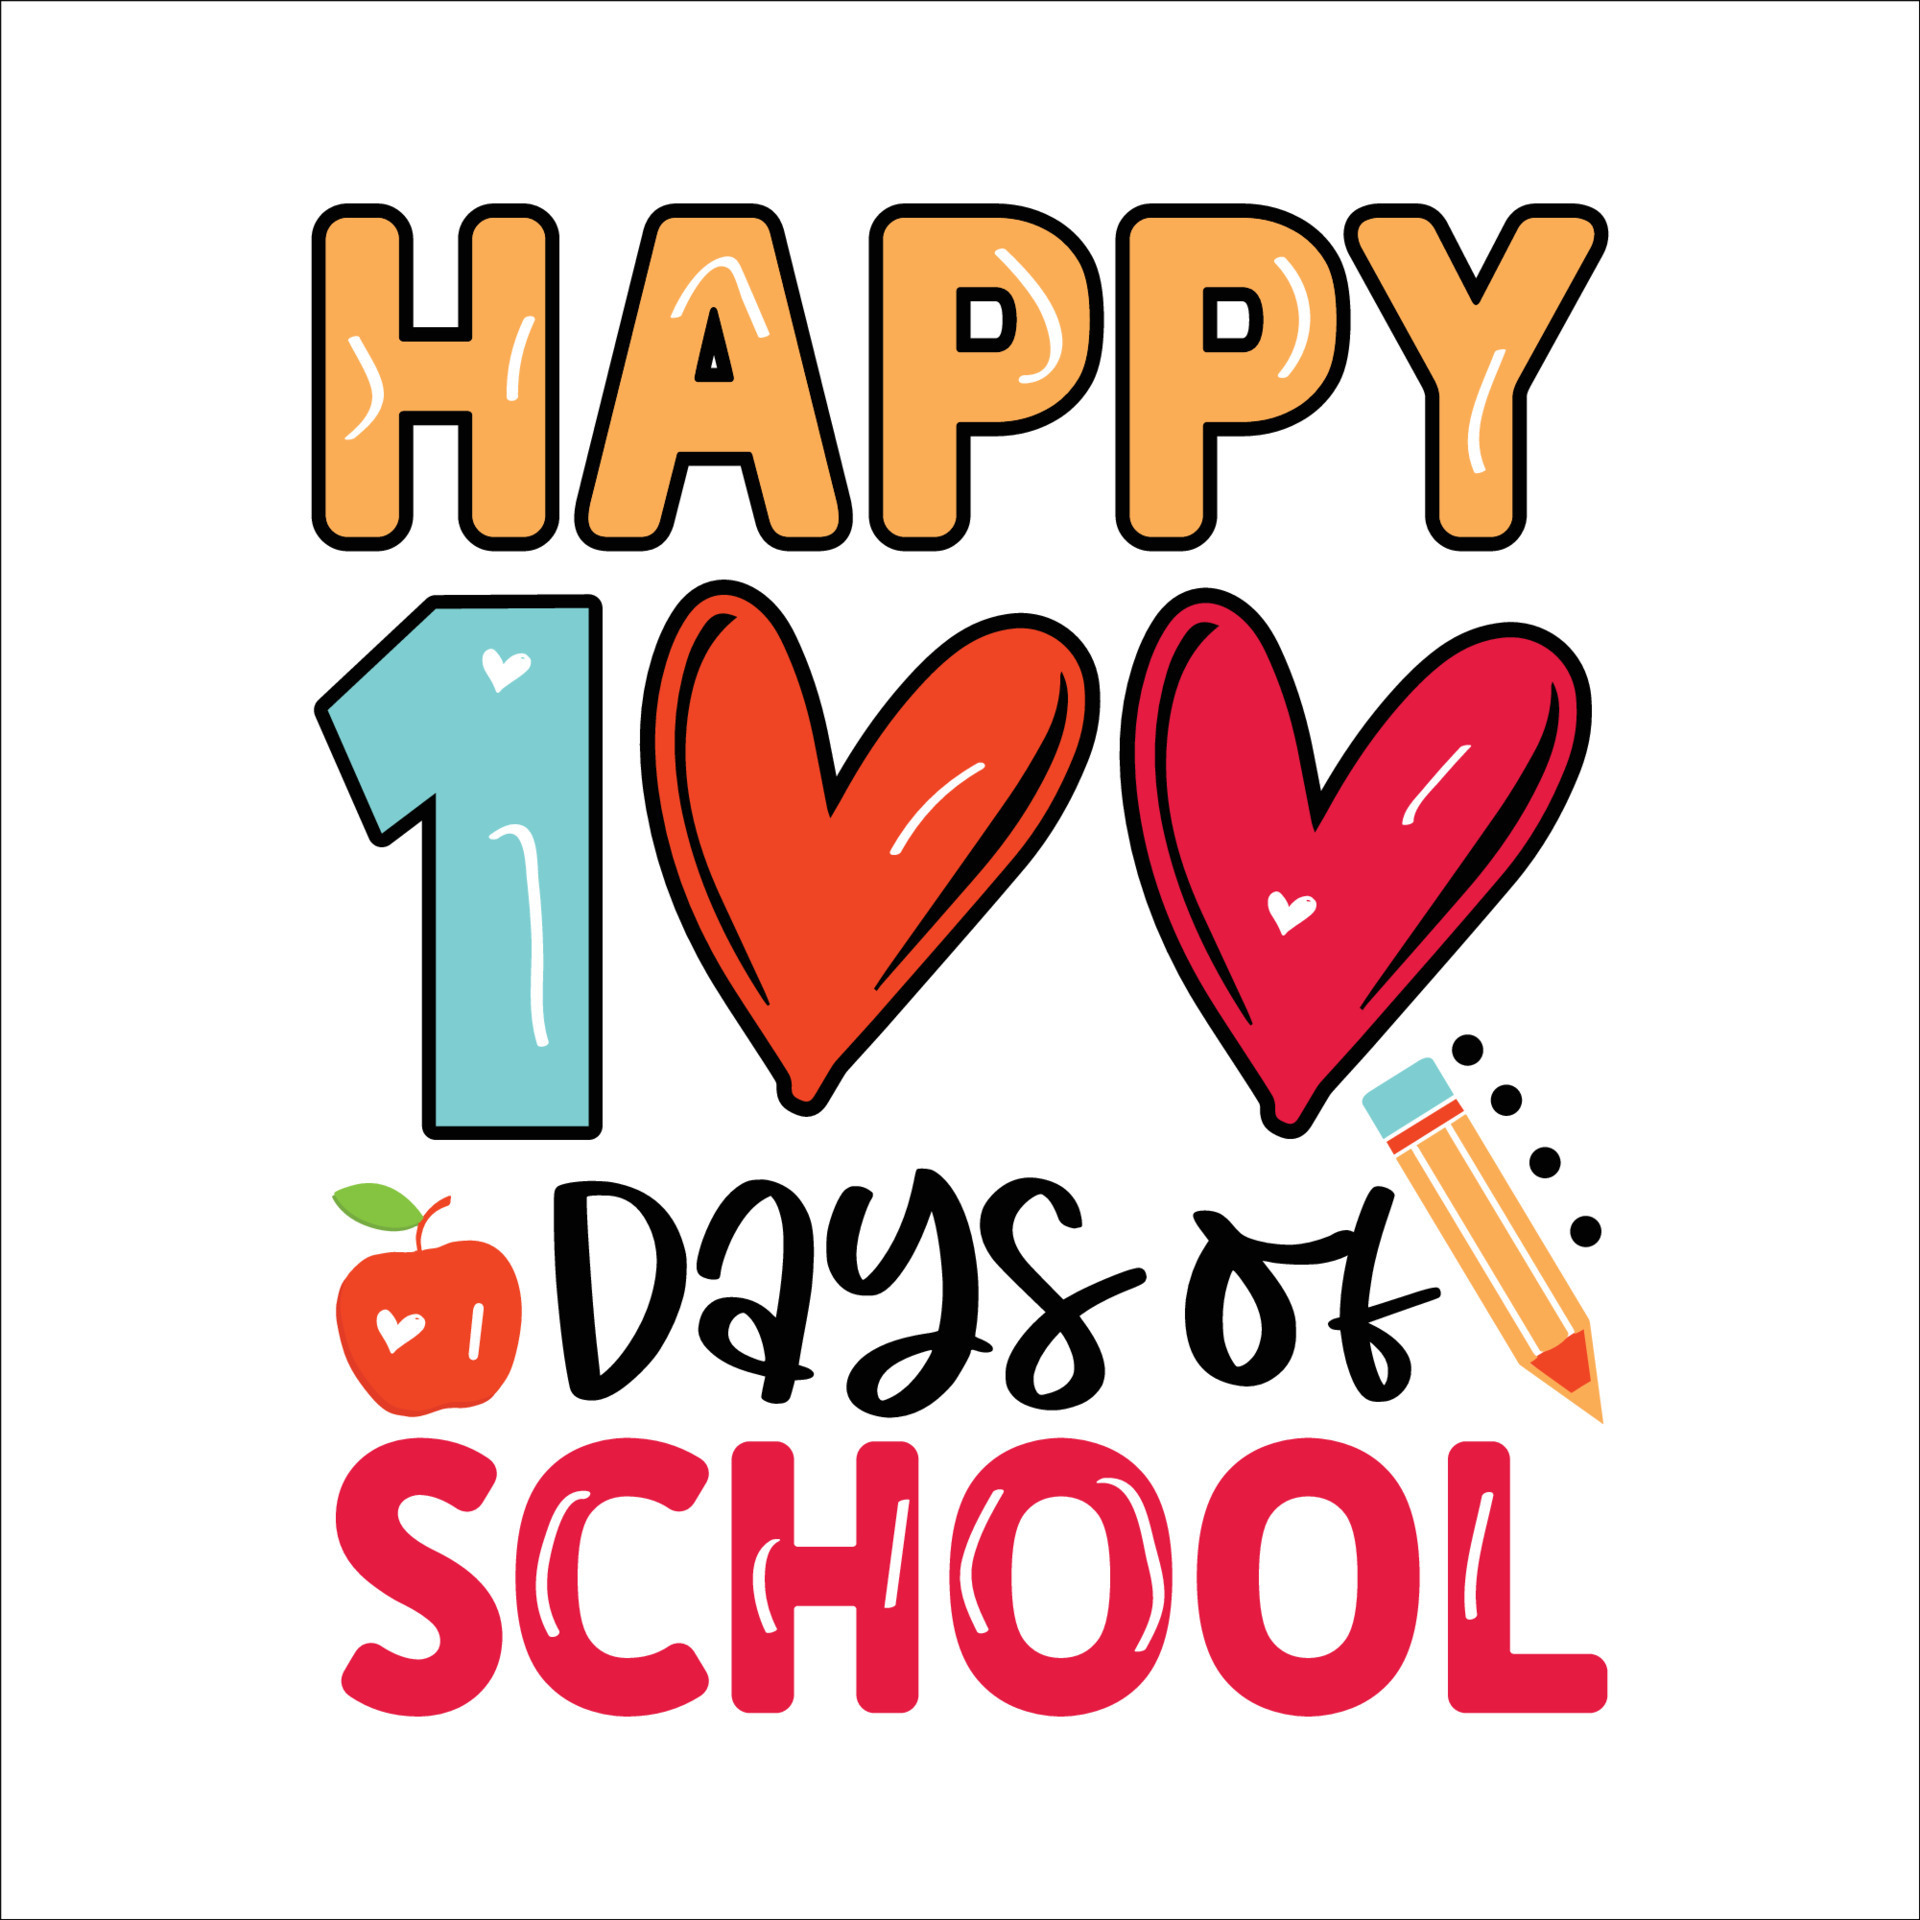 100 days of school t shirt Design Bundle, Unique And Colorful 100 days  School T-Shirt Design,Happy 100th day of school. Congratulatory lettering  for the celebration of the hundredth day of the student